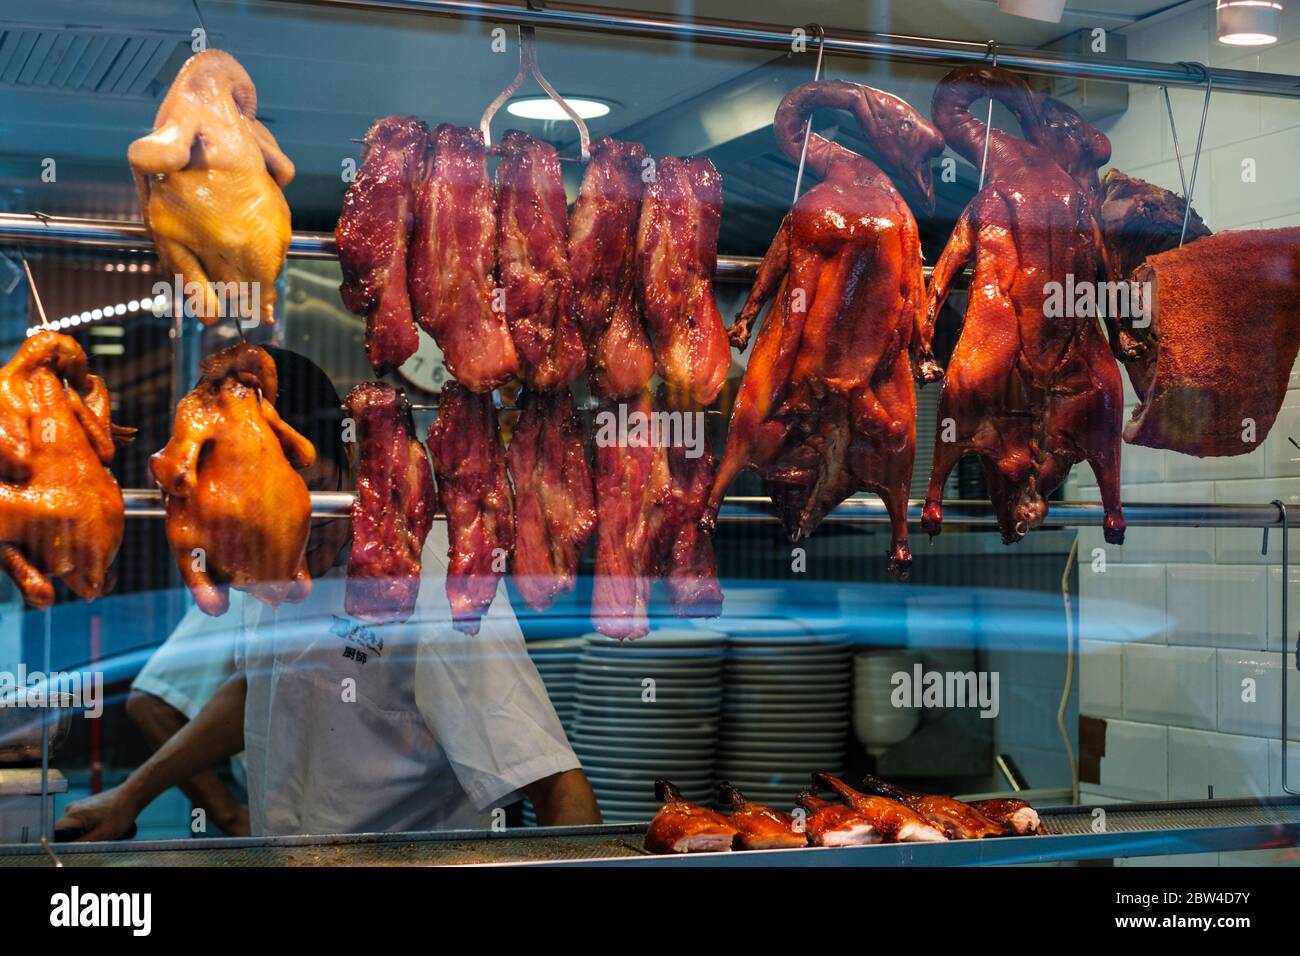 Hong Kong - November, 2019: Roasted ducks, peking duck and roast goose, a common picture in restaurant window of Hong Kong Stock Photo